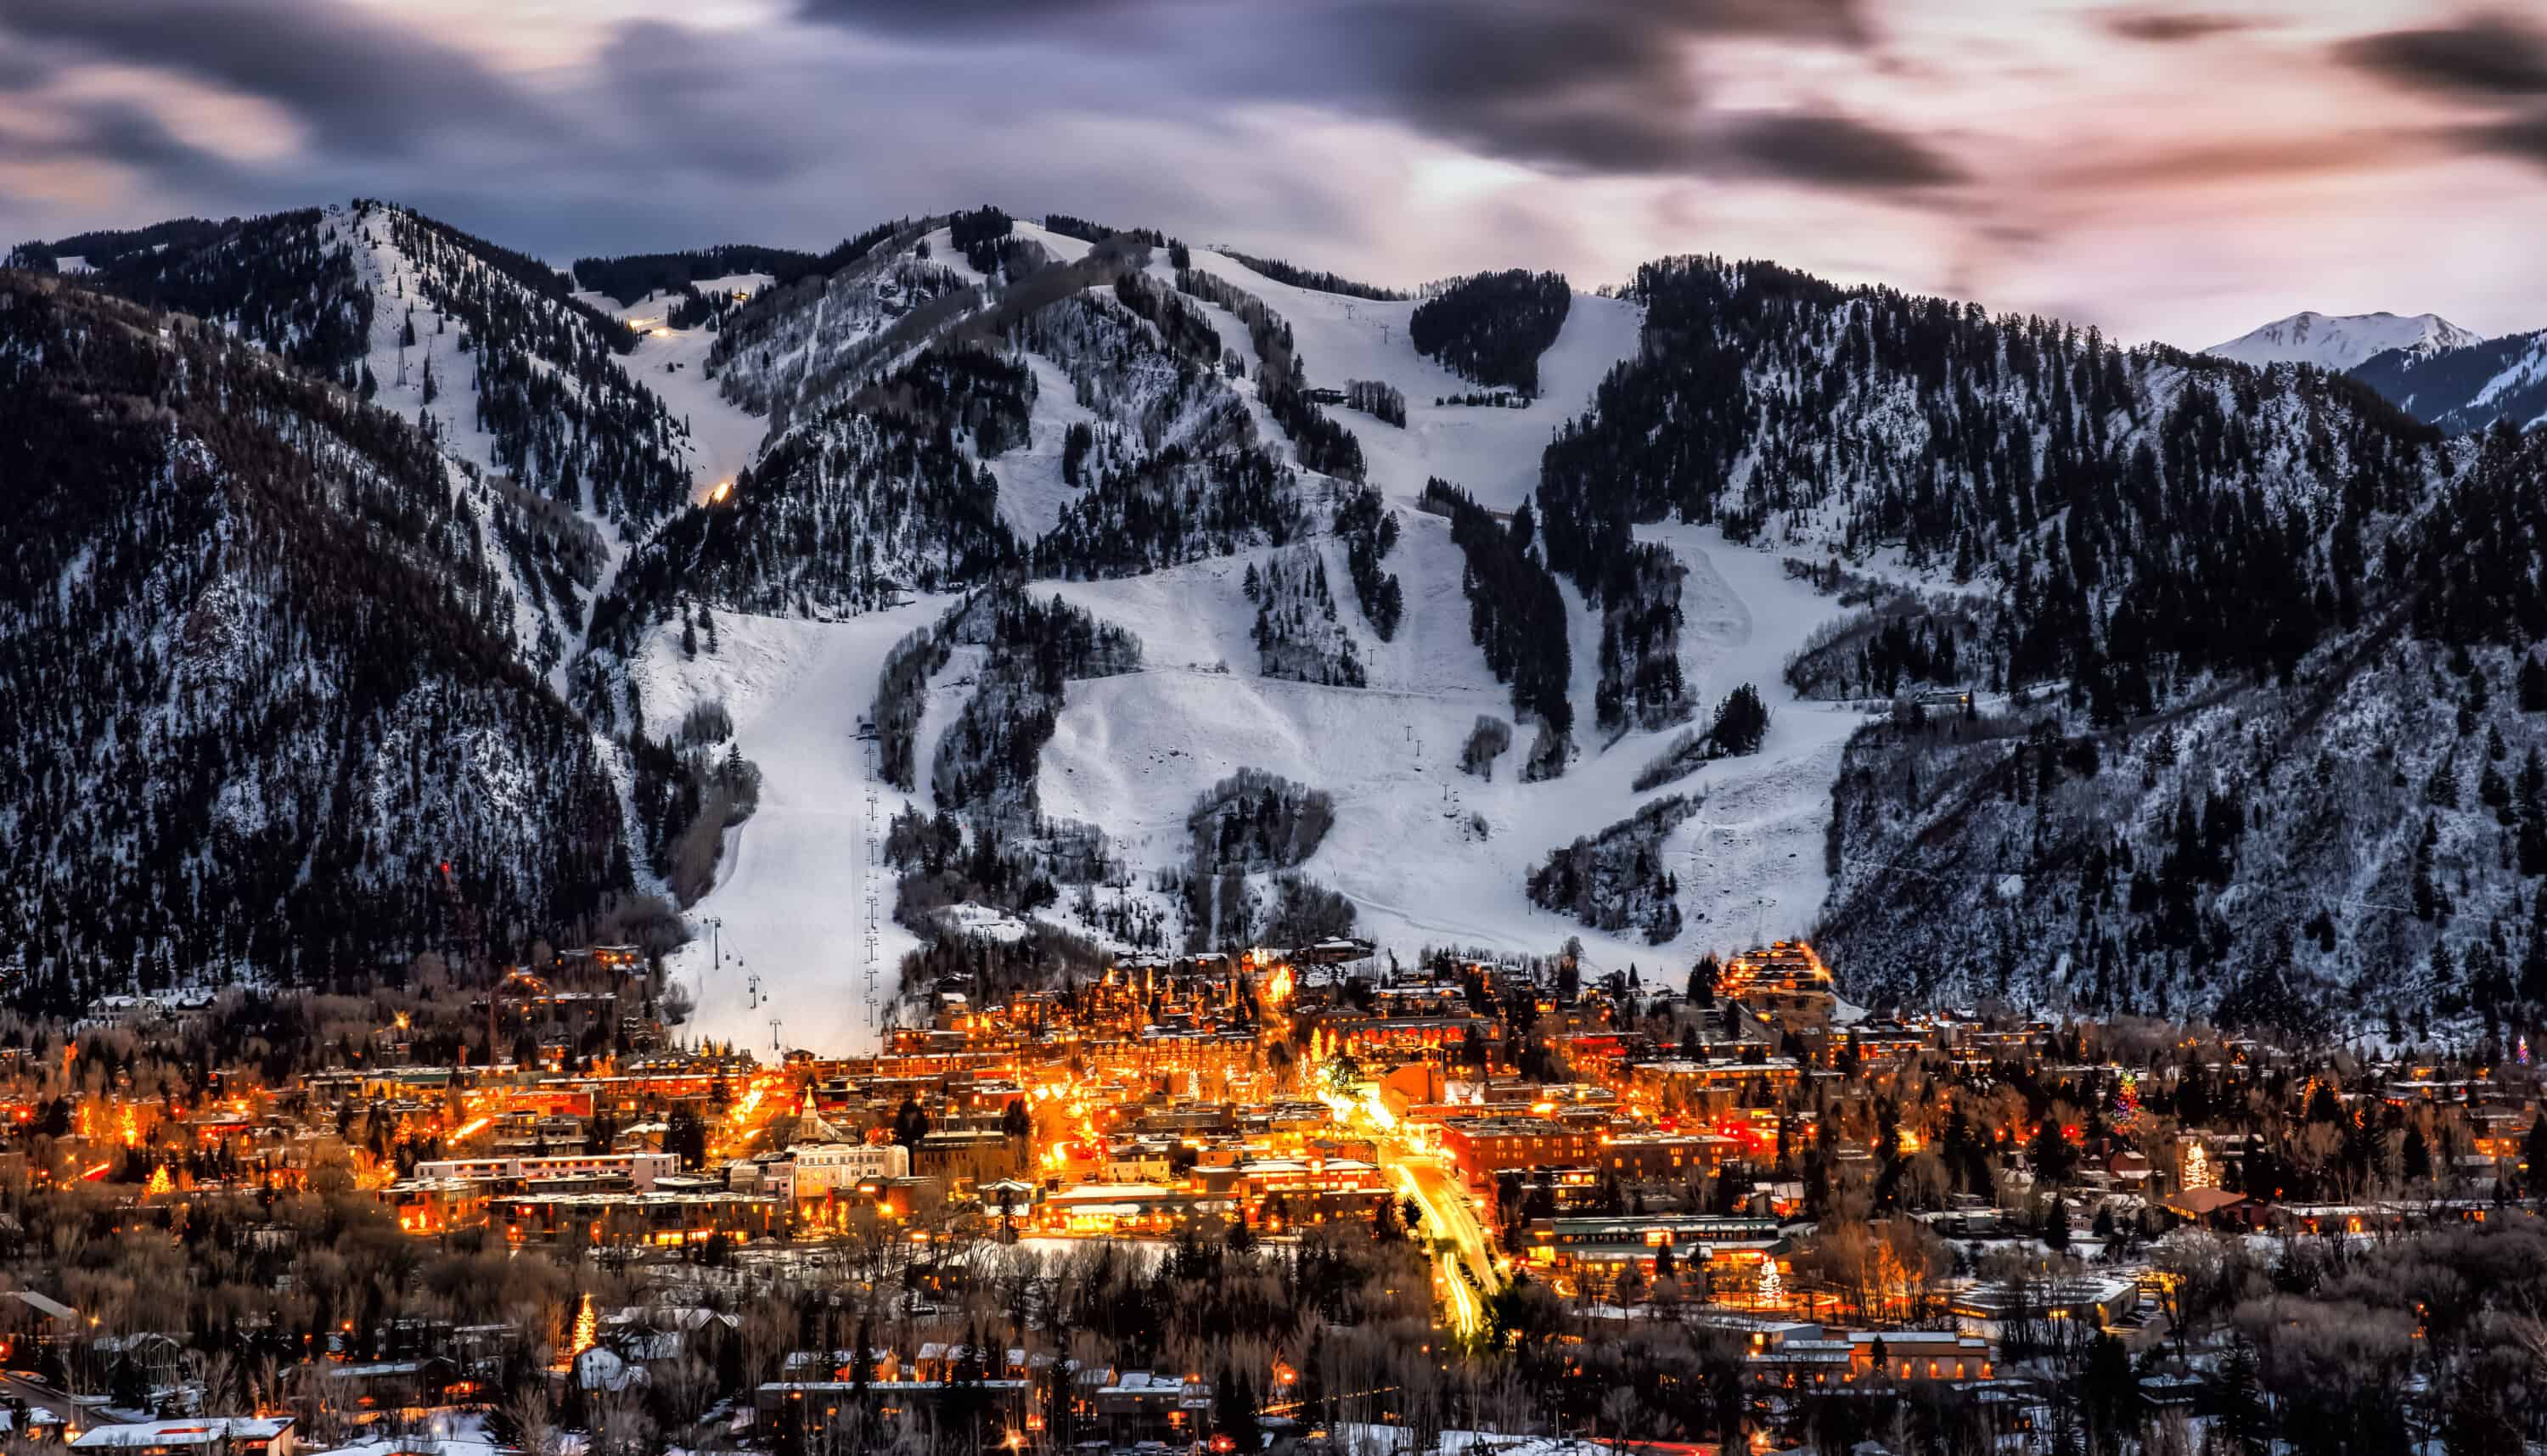 Aspen, CO skyline at sundown with a large mountain in the background and the town below it lit up.